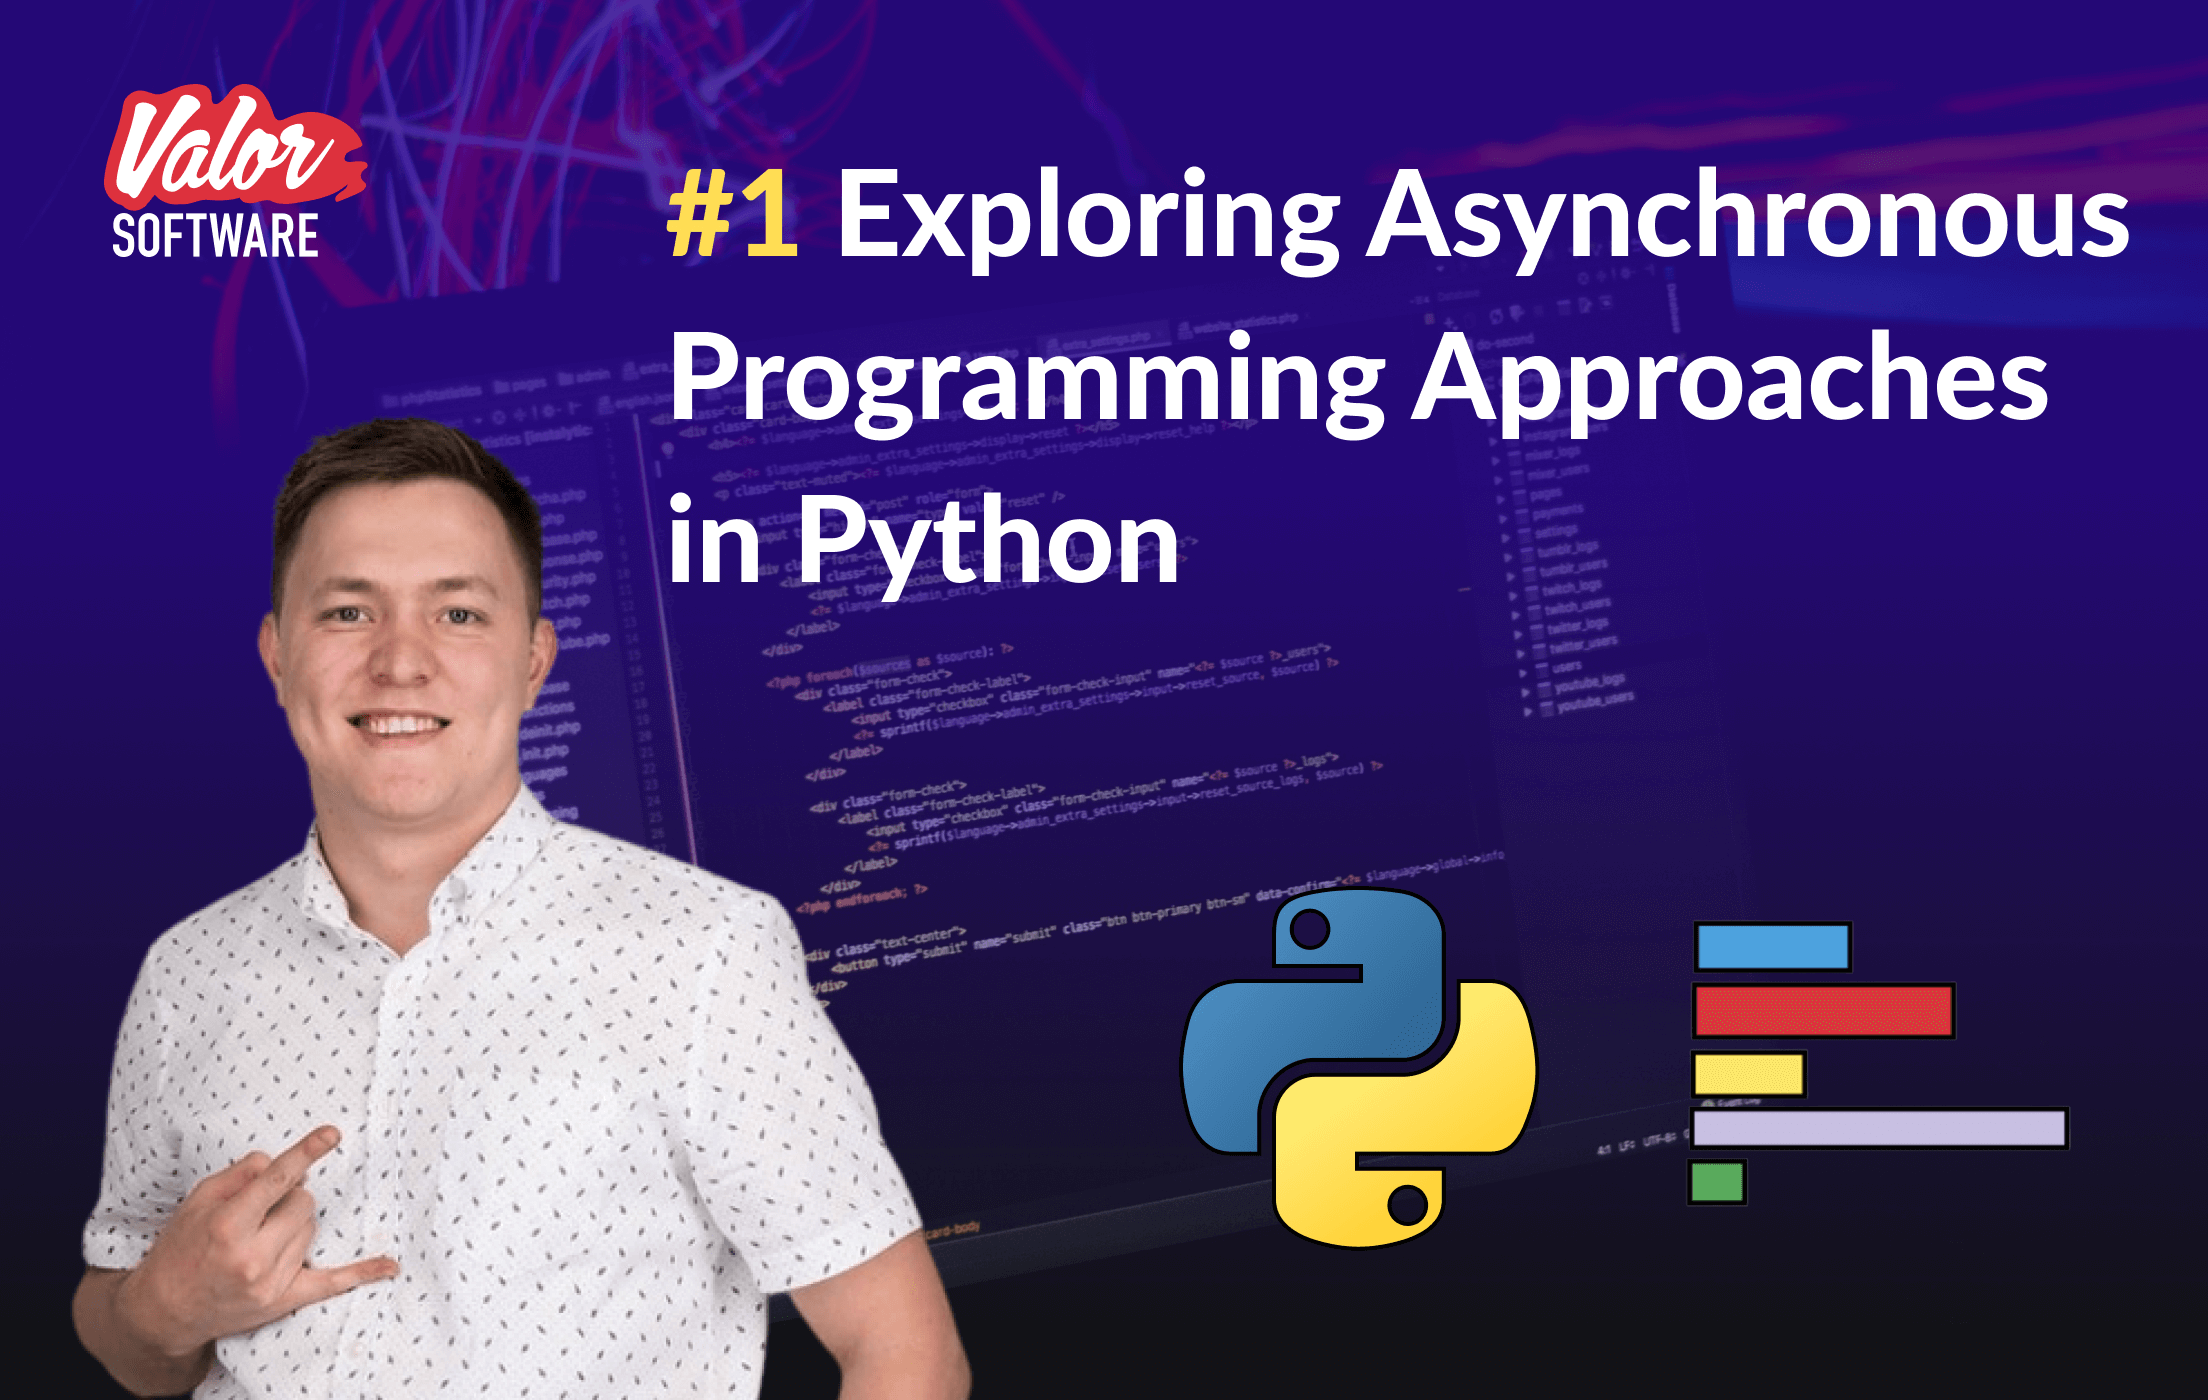 Exploring Asynchronous Programming Approaches in Python (Mastering Asynchronous Programming in Python)image